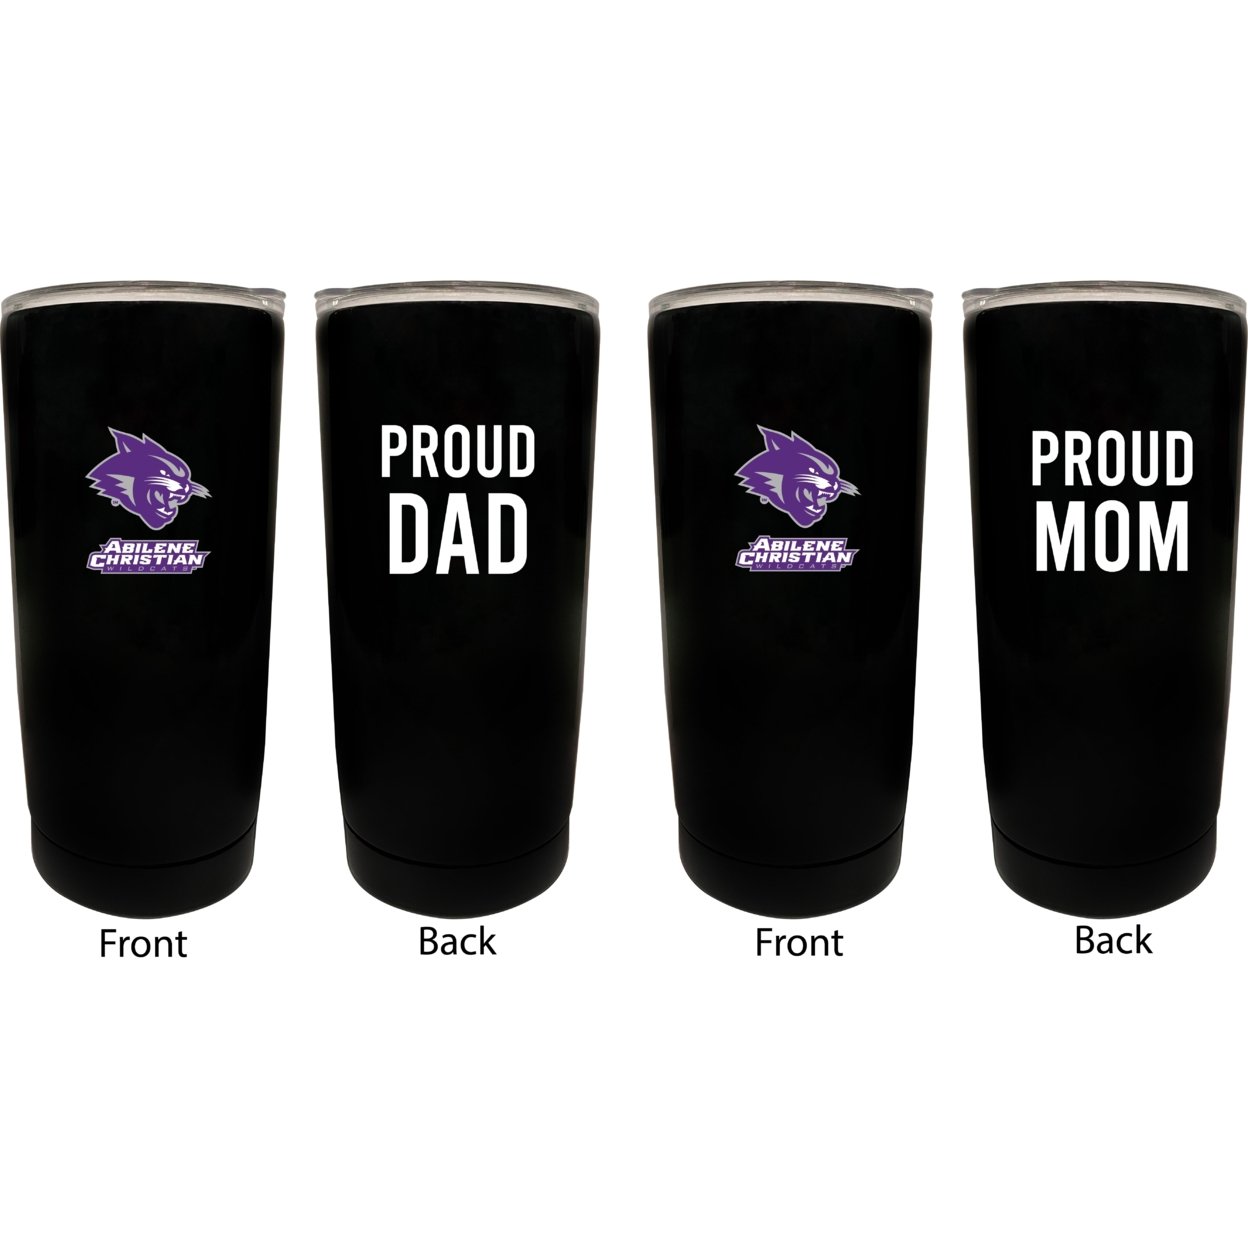 Abilene Christian University Proud Mom And Dad 16 Oz Insulated Stainless Steel Tumblers 2 Pack Black.